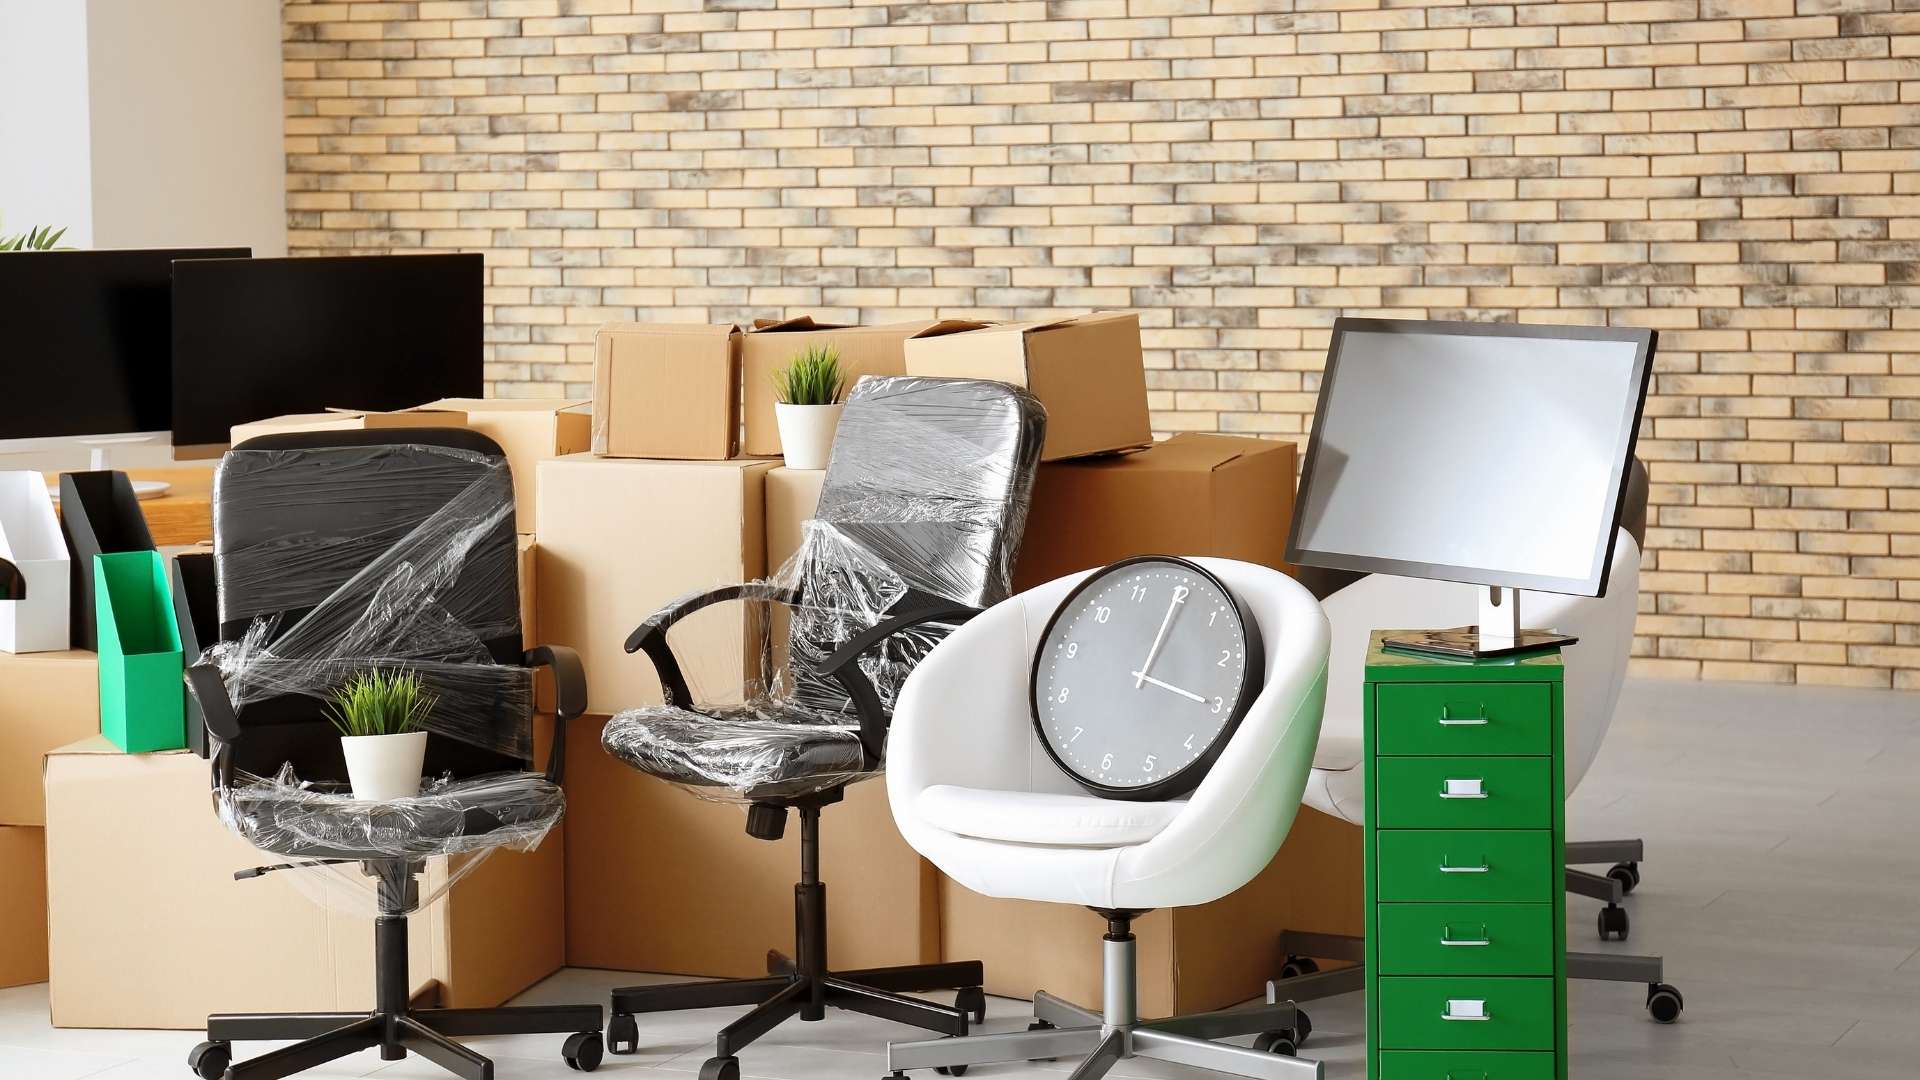 packing and moving office spaces